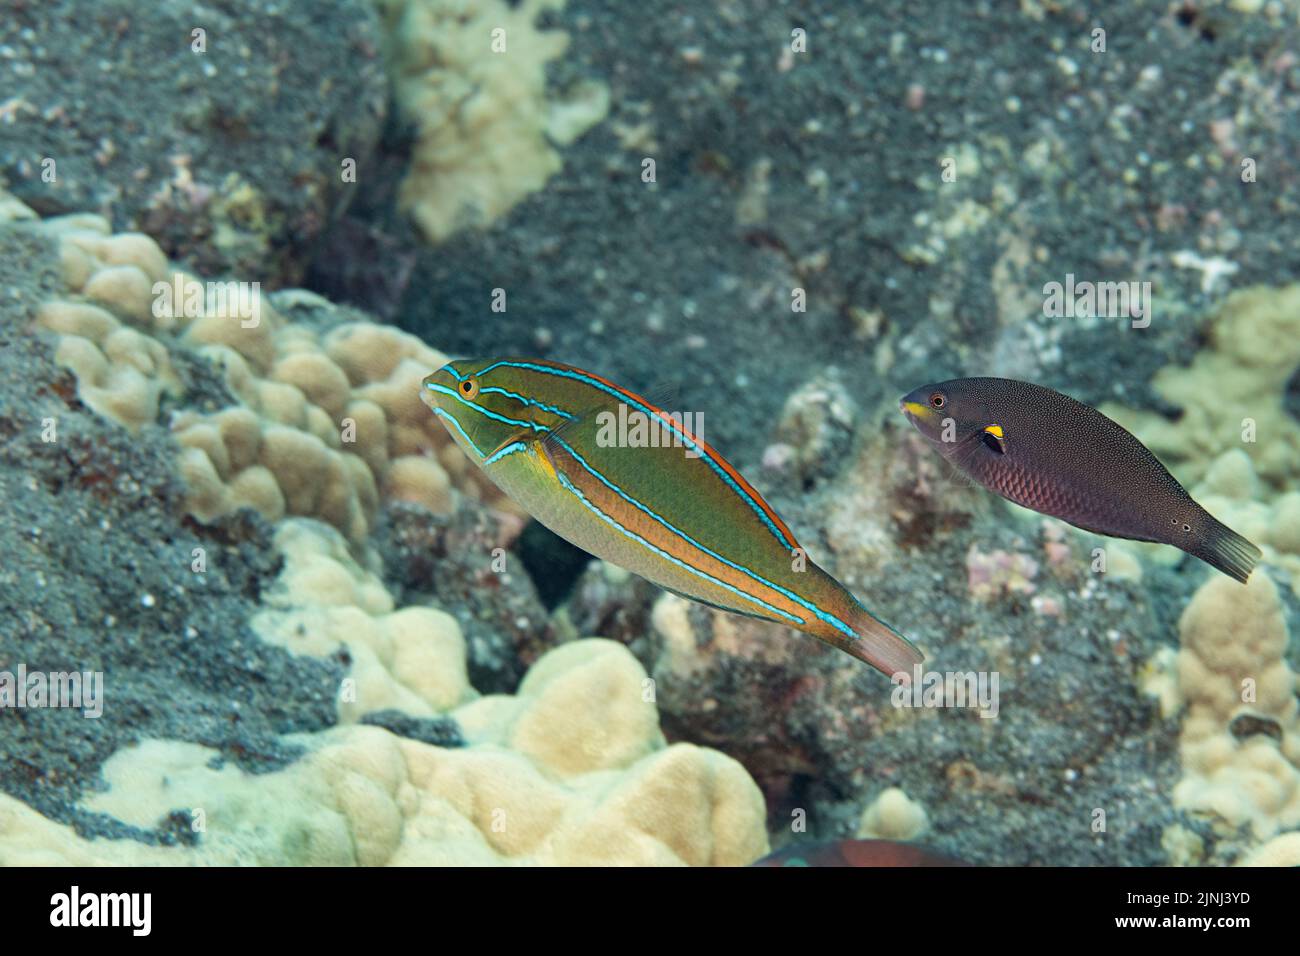 endemic belted wrasse, green wrasse, orange-bar wrasse, or 'omaka, Stethojulis balteata, terminal male on left, with initial phase on right, Hawaii Stock Photo